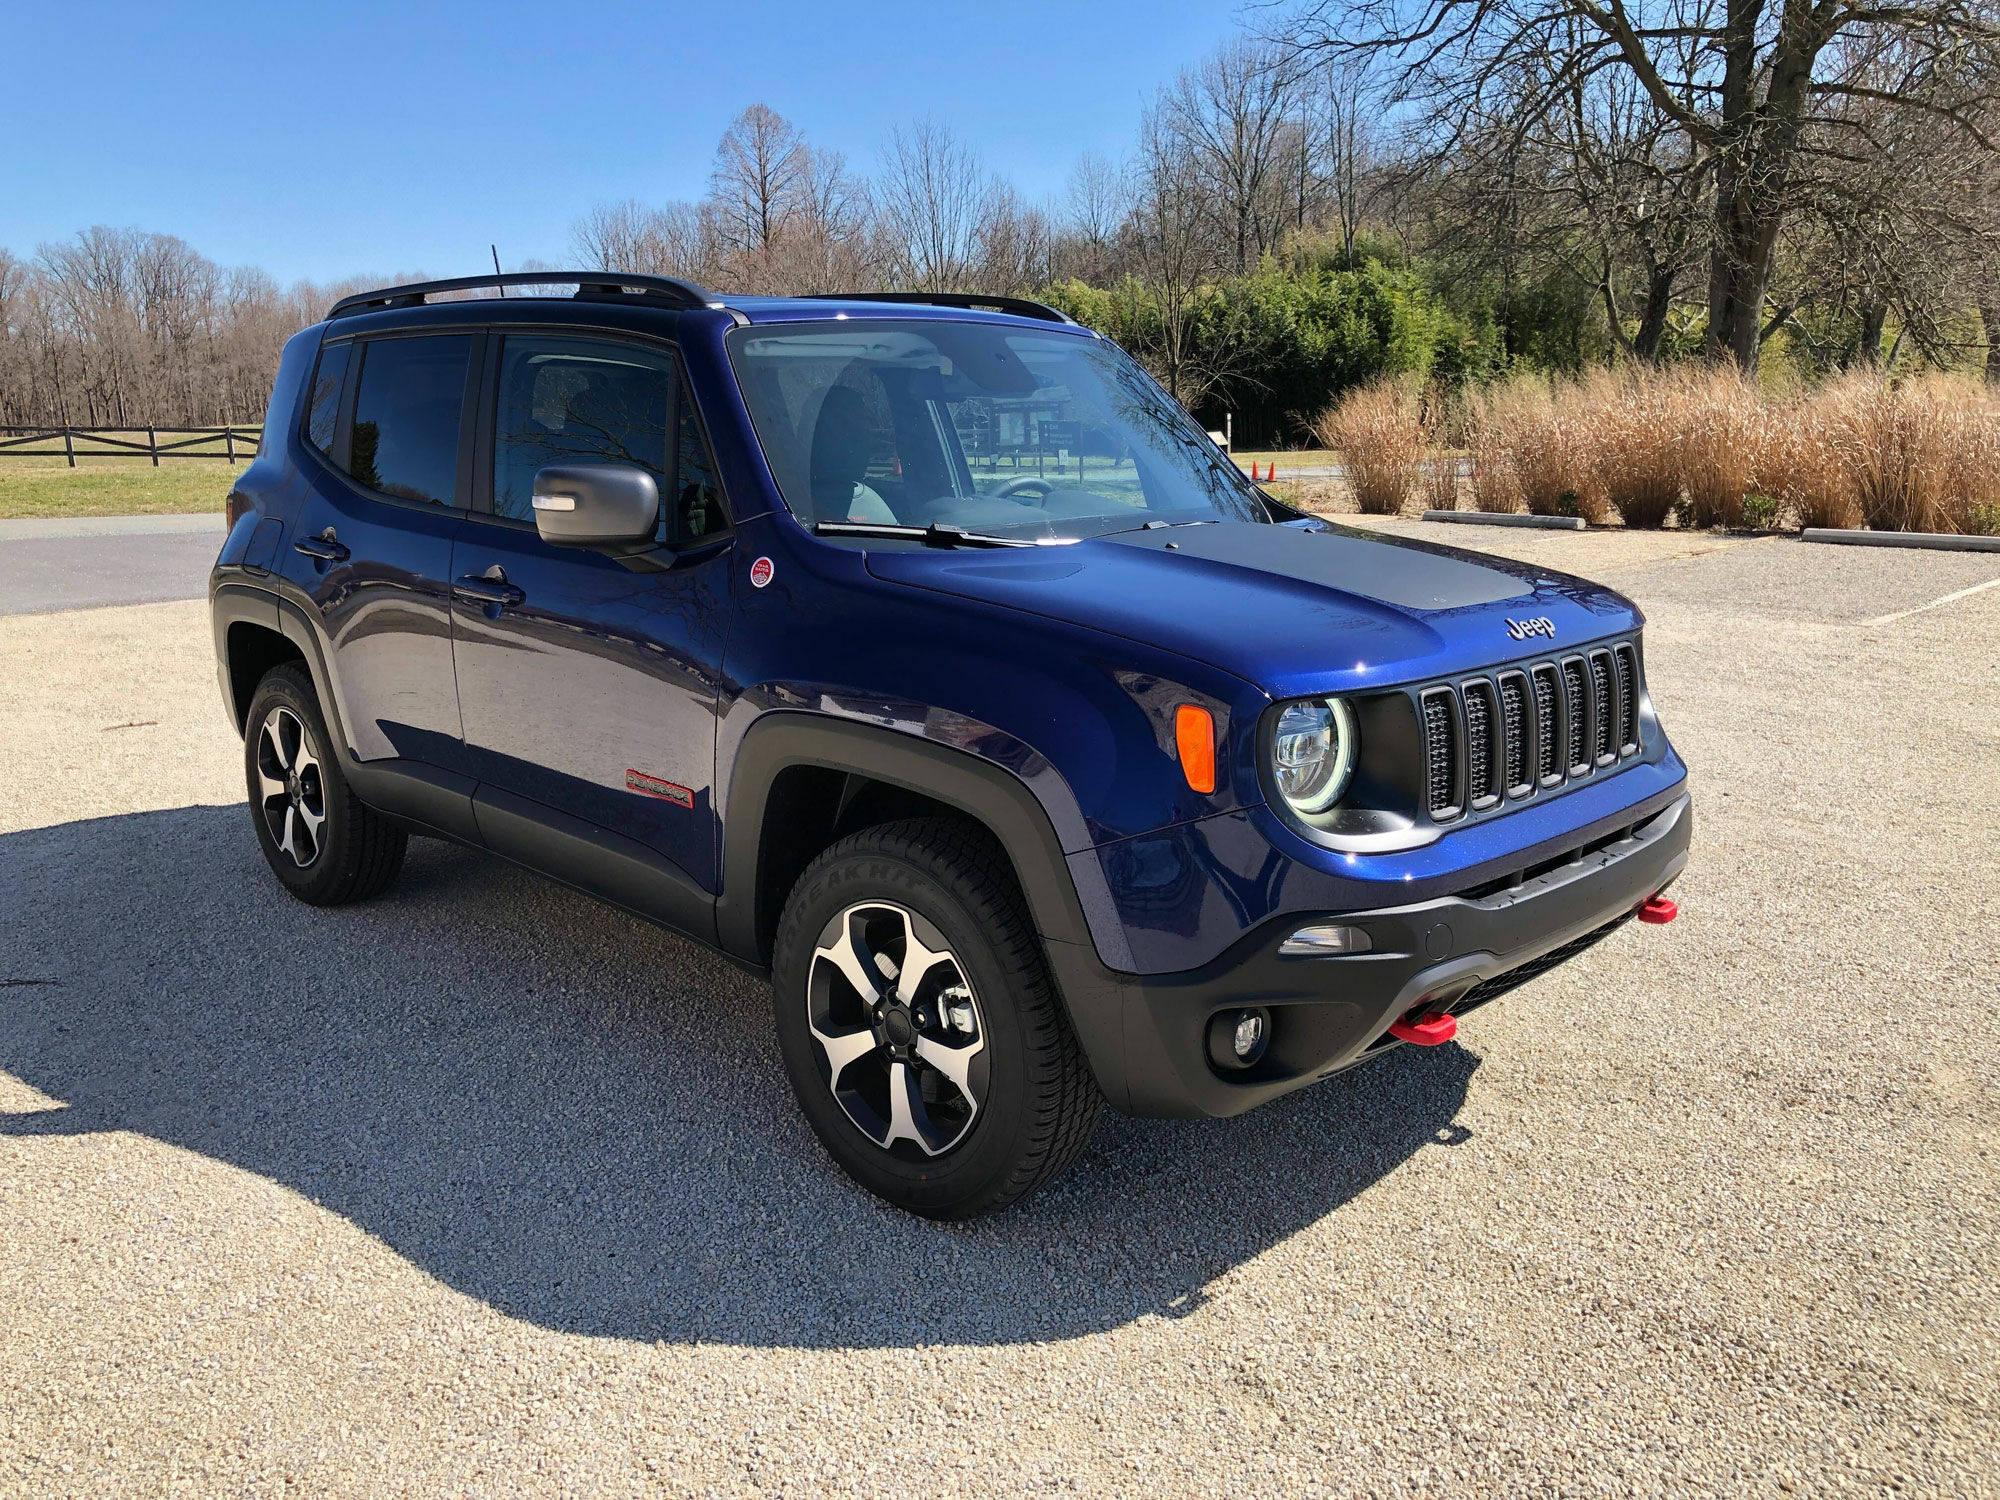 Car Review: With a new engine, Jeep's 2020 Renegade packs a punch